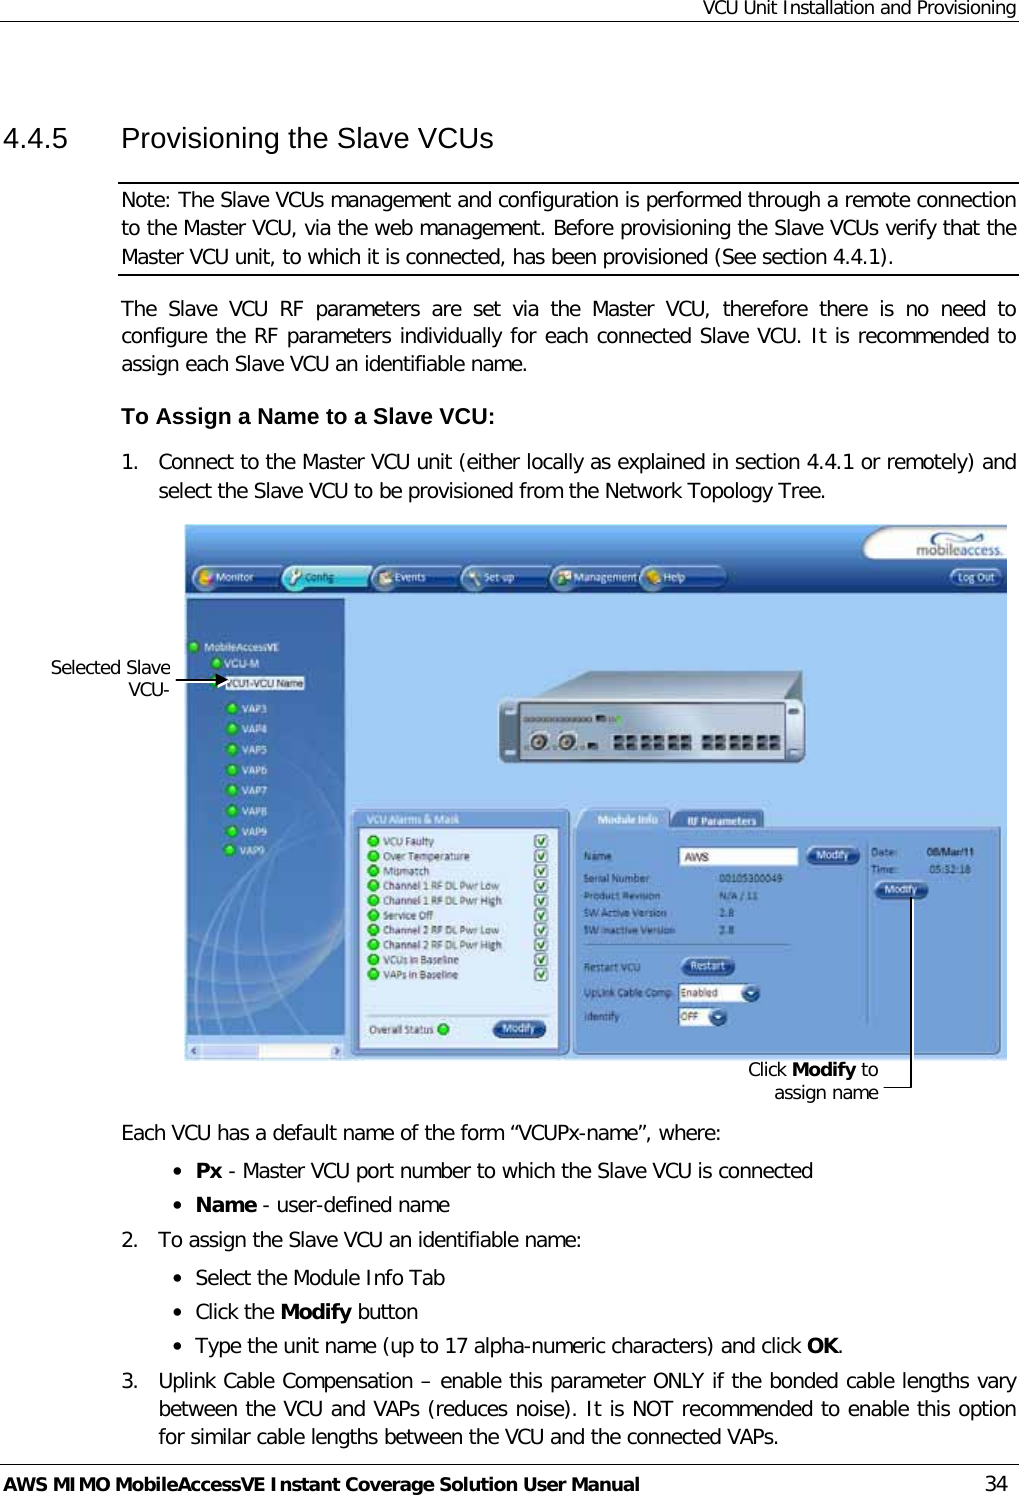 VCU Unit Installation and Provisioning AWS MIMO MobileAccessVE Instant Coverage Solution User Manual  34  4.4.5  Provisioning the Slave VCUs Note: The Slave VCUs management and configuration is performed through a remote connection to the Master VCU, via the web management. Before provisioning the Slave VCUs verify that the Master VCU unit, to which it is connected, has been provisioned (See section  4.4.1). The  Slave  VCU RF parameters are set via the Master VCU, therefore there is no need to configure the RF parameters individually for each connected Slave VCU. It is recommended to assign each Slave VCU an identifiable name. To Assign a Name to a Slave VCU: 1.  Connect to the Master VCU unit (either locally as explained in section  4.4.1 or remotely) and select the Slave VCU to be provisioned from the Network Topology Tree.     Each VCU has a default name of the form “VCUPx-name”, where: • Px - Master VCU port number to which the Slave VCU is connected • Name - user-defined name 2.  To assign the Slave VCU an identifiable name: • Select the Module Info Tab • Click the Modify button • Type the unit name (up to 17 alpha-numeric characters) and click OK. 3.  Uplink Cable Compensation – enable this parameter ONLY if the bonded cable lengths vary between the VCU and VAPs (reduces noise). It is NOT recommended to enable this option for similar cable lengths between the VCU and the connected VAPs. Selected Slave VCU- Click Modify to assign name 